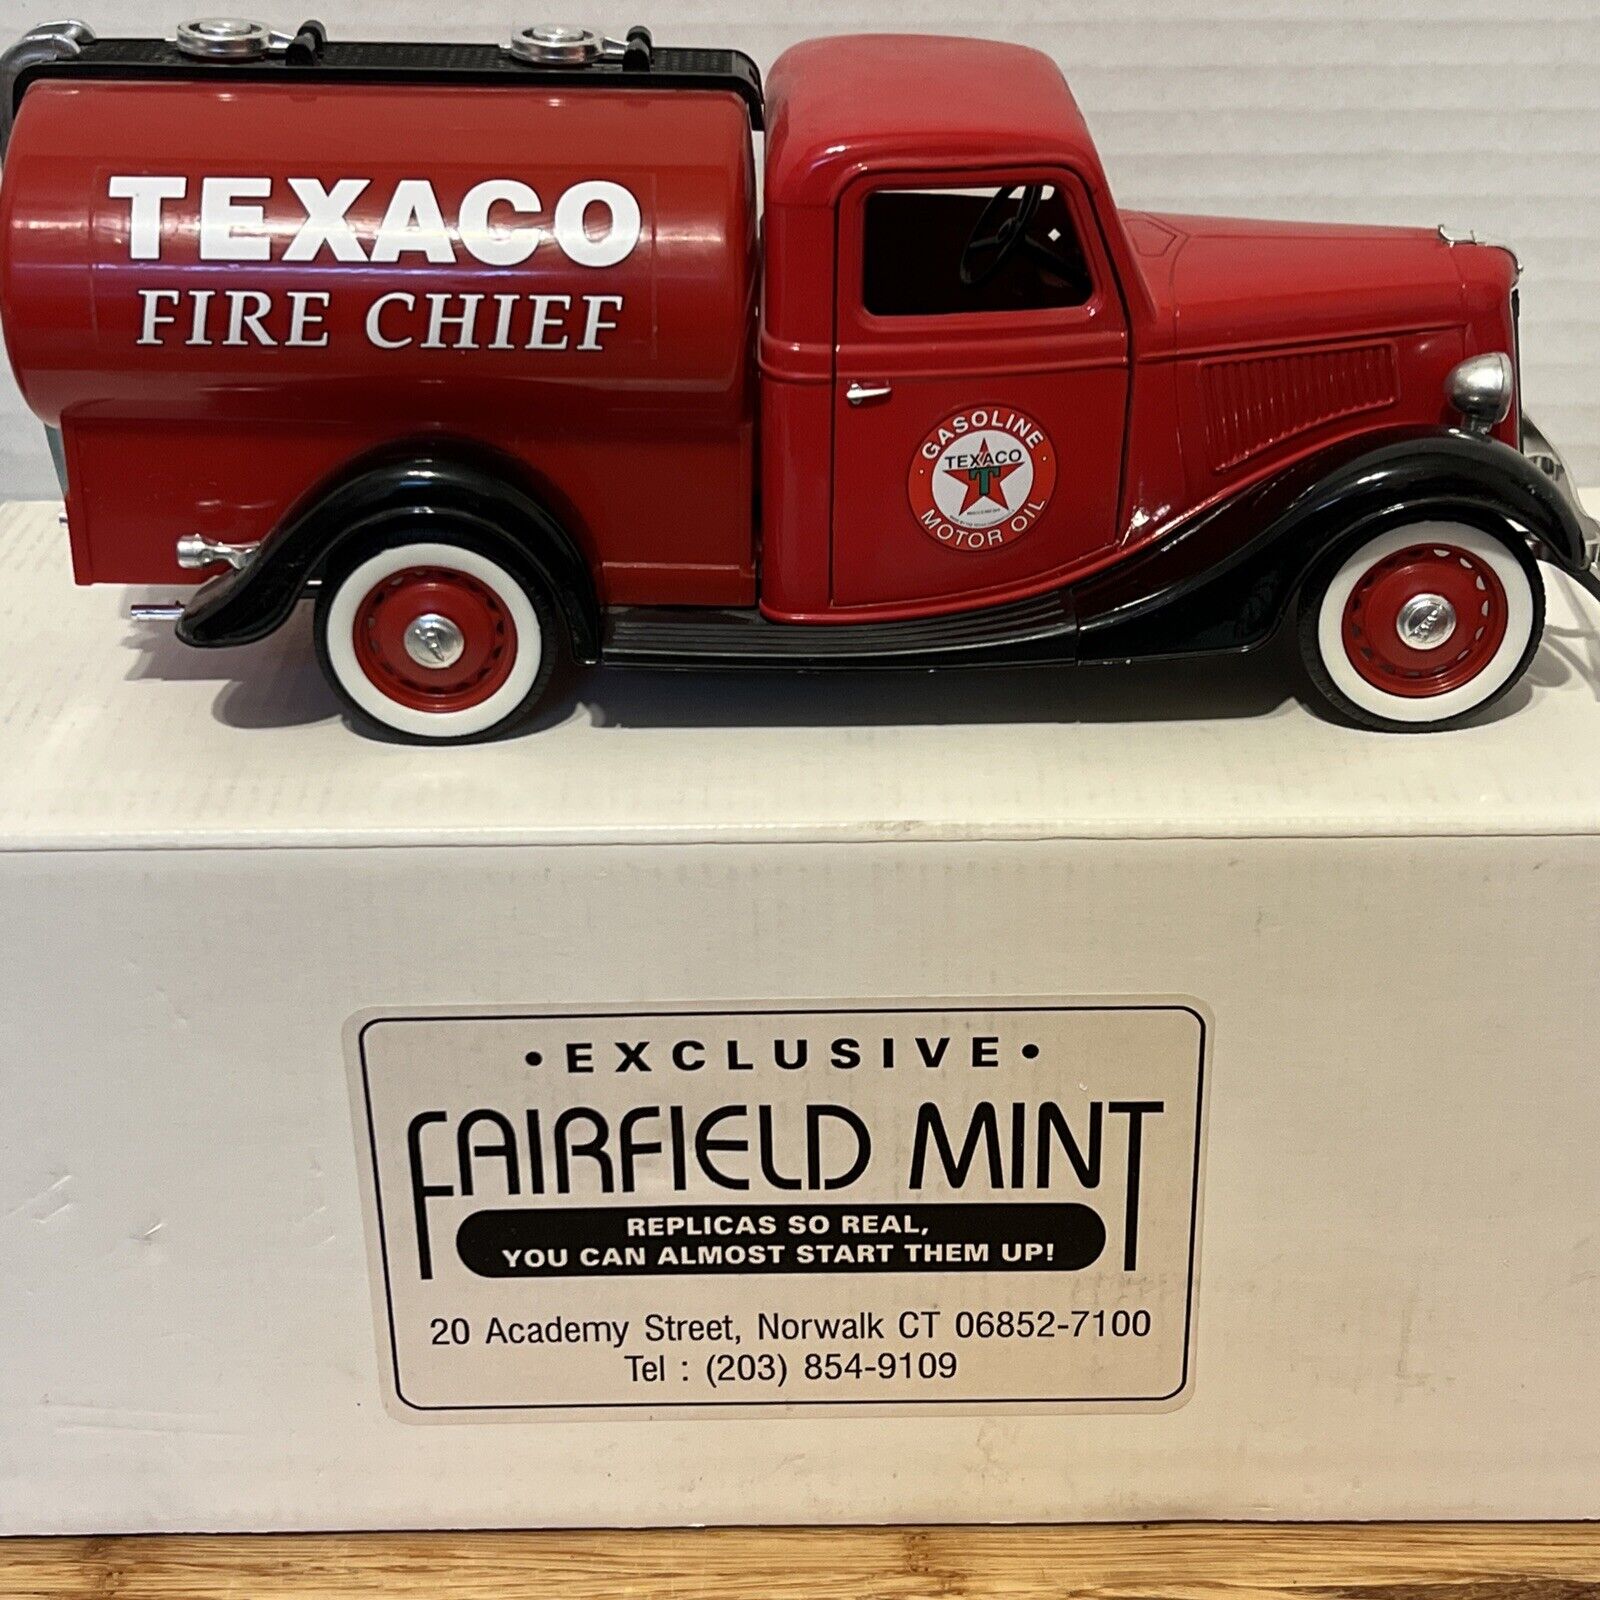 FAIRFIELD MINT No99103 MADE IN FRANCE THE FORD CITERNE TEXACO FIRE CHIEF TANKER